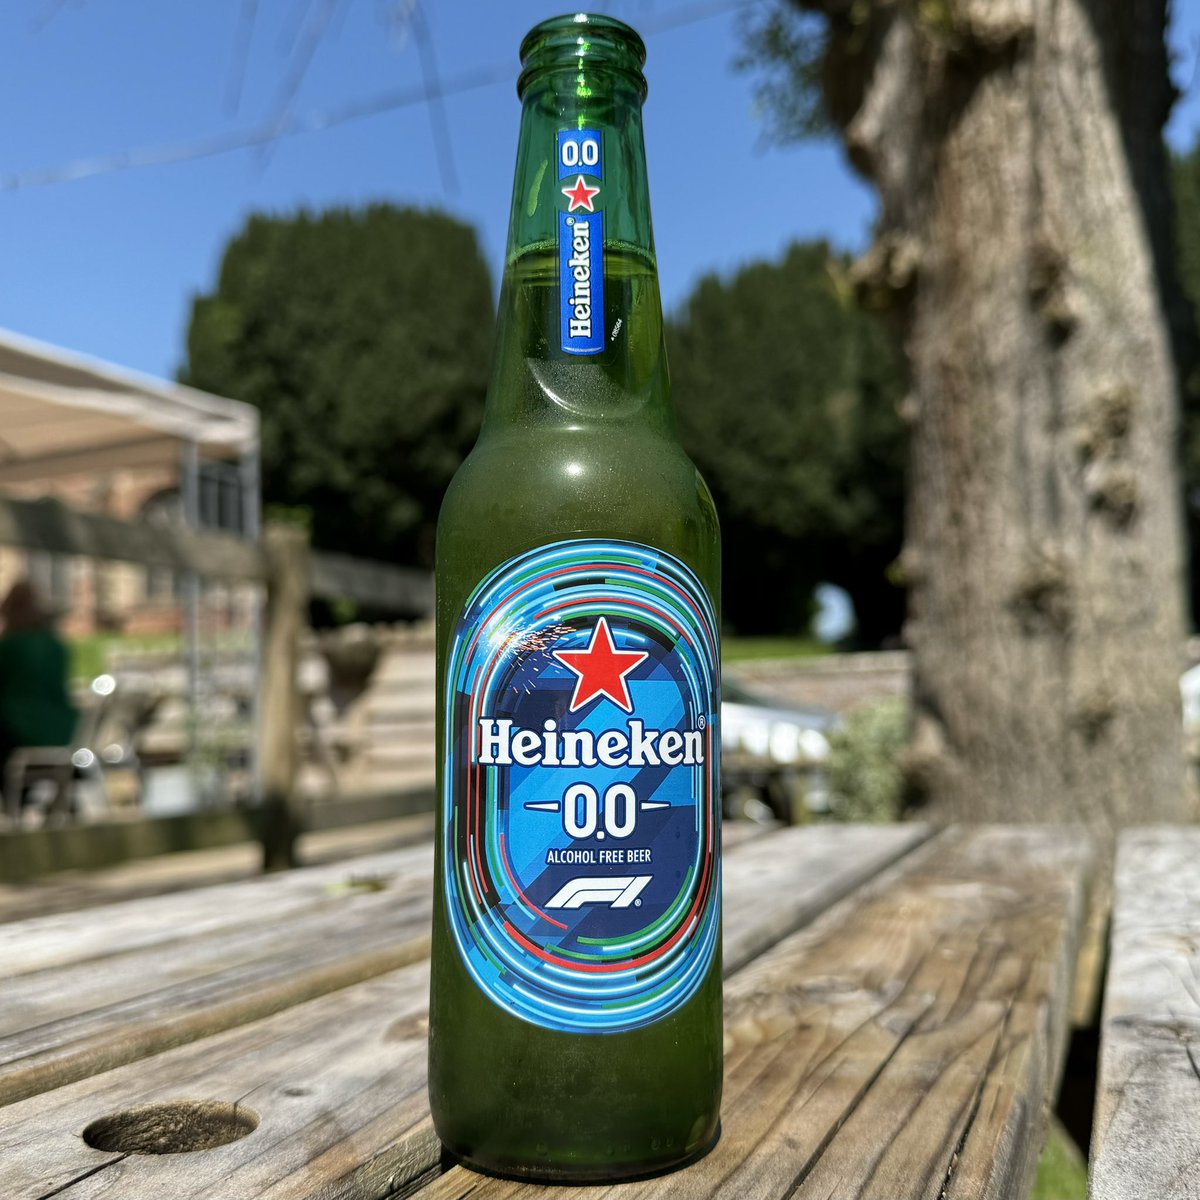 If one must work on one’s birthday, it’s still nice to be able to celebrate it with an alcohol-free midday drink in a sunny beer garden! #beergarden #middaydrink #alcoholfreemiddaydrink #alcoholfreebeer